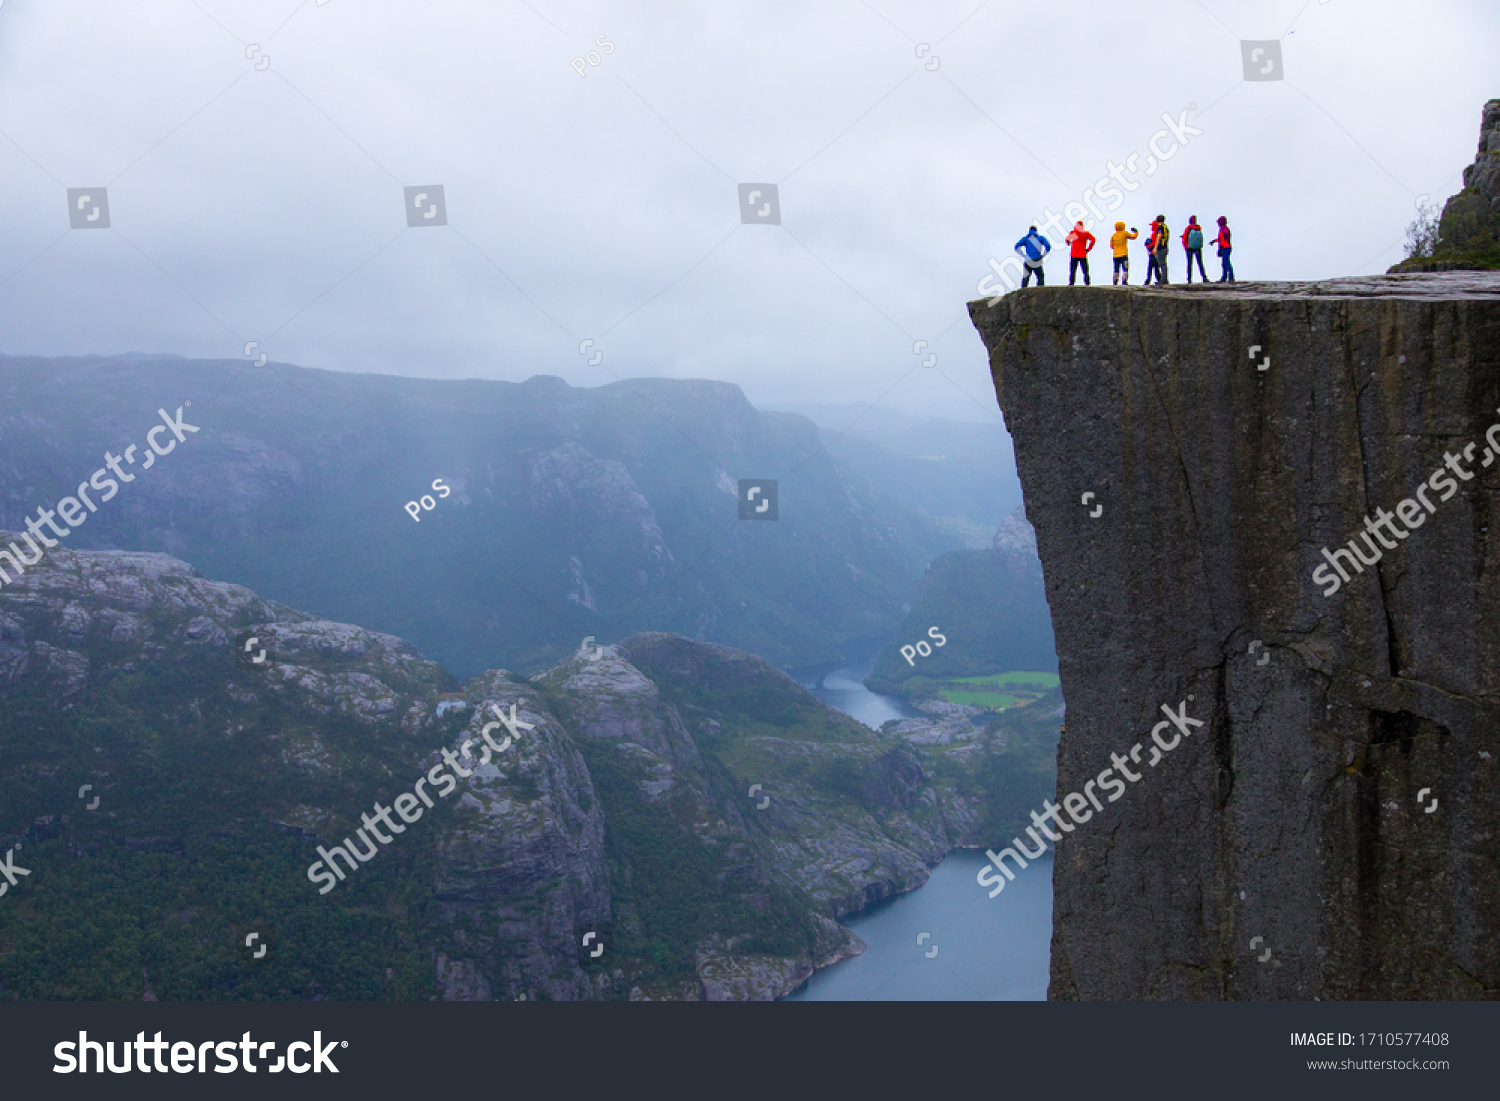 Majestic Preikestolen over Lysefjorden, Stavanger, Norway. Famous hiking trail and spot to enjoy the view over Norwegian fjord and mountain. #1710577408